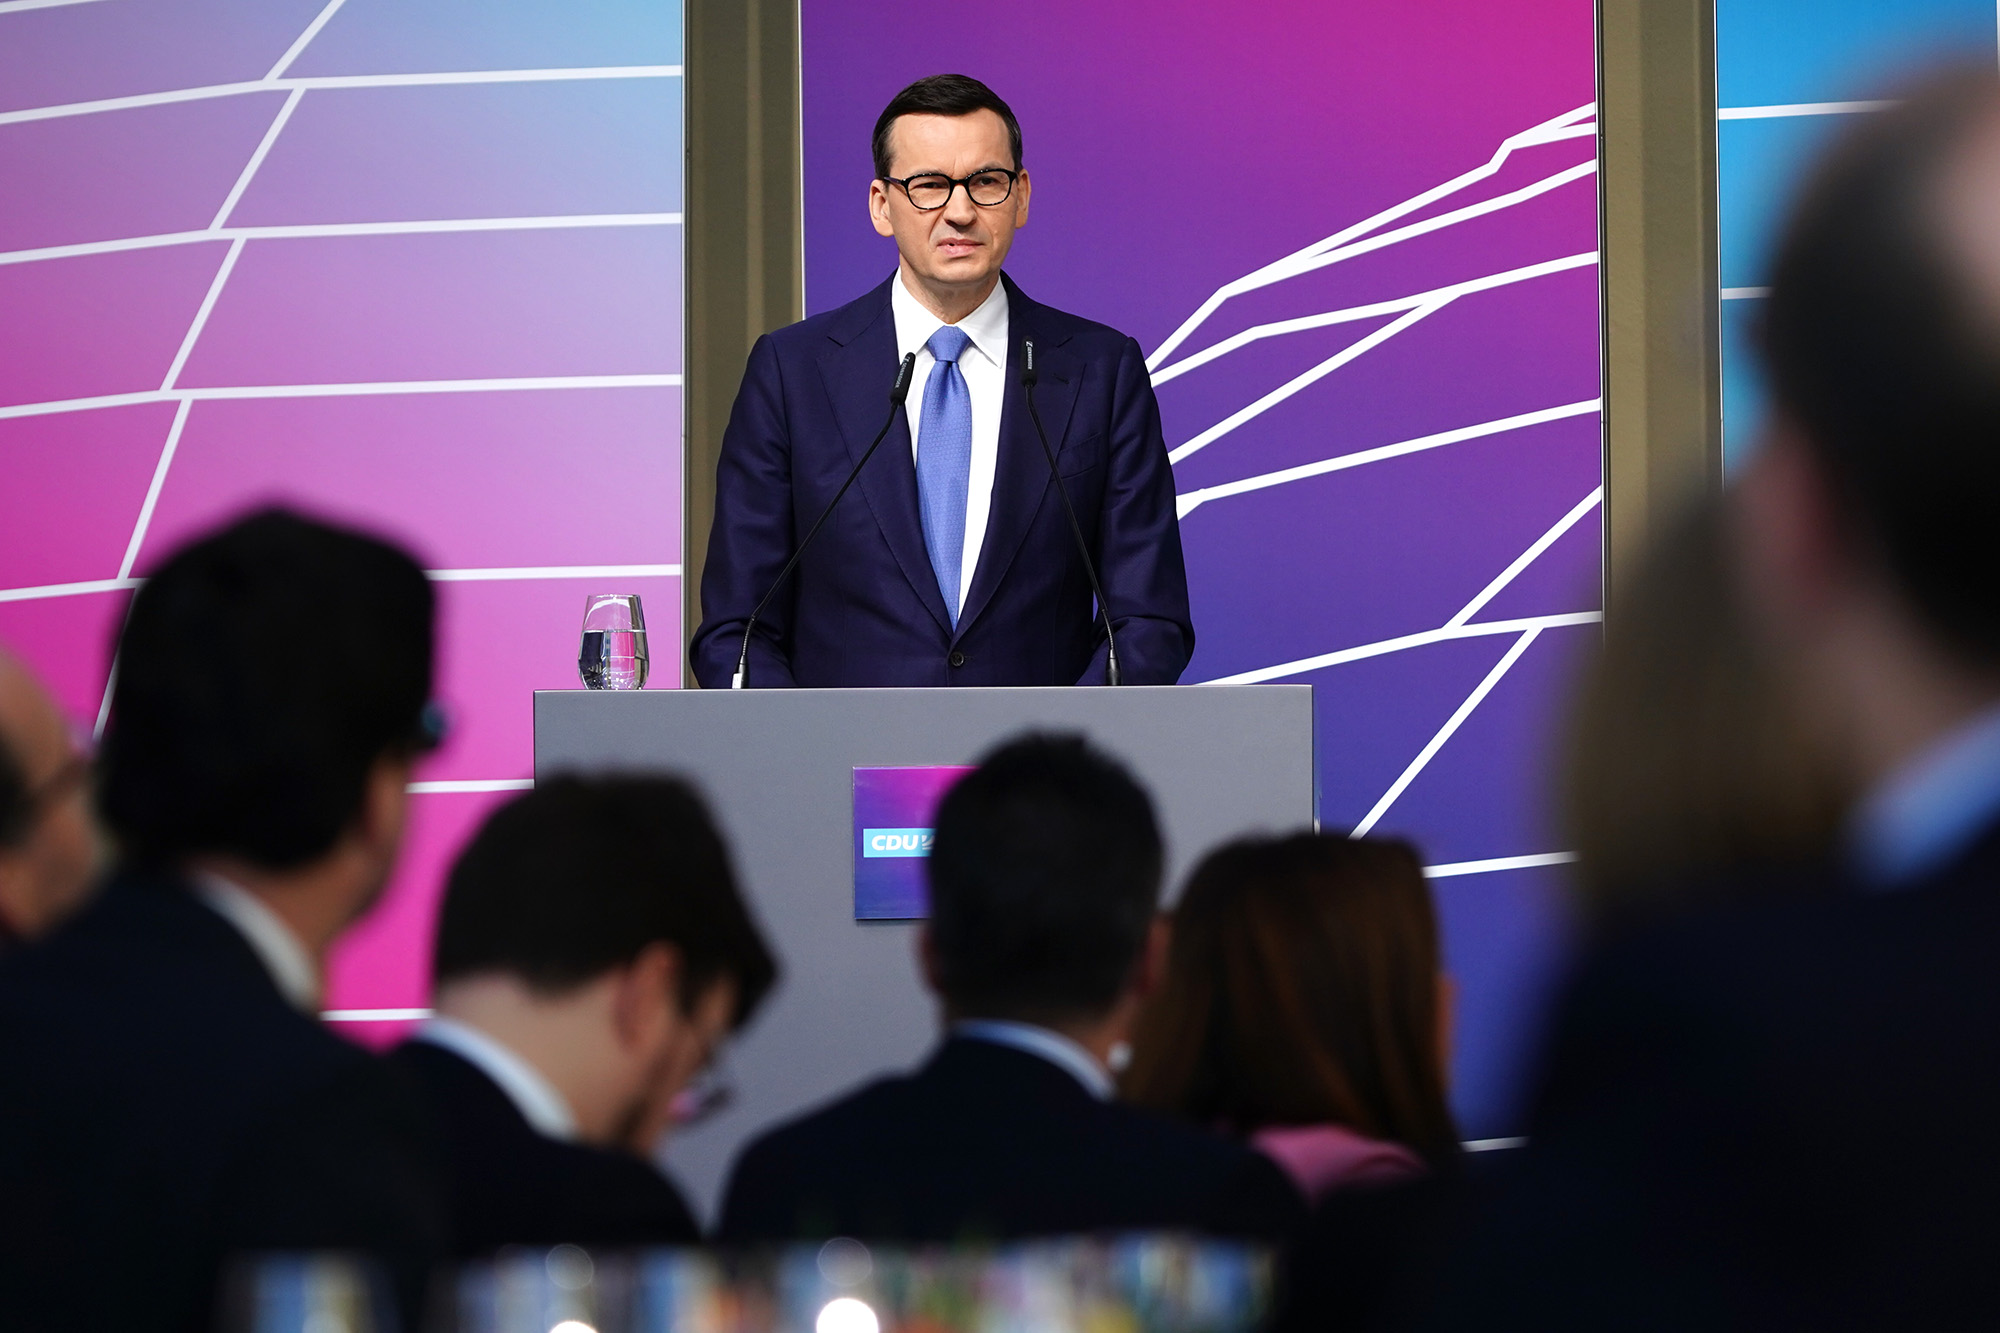 Polish Prime Minister Mateusz Morawiecki speaks during a festive event on the occasion of Wolfgang Schäuble's 50th anniversary in parliament on January 16, in Berlin, Germany. 